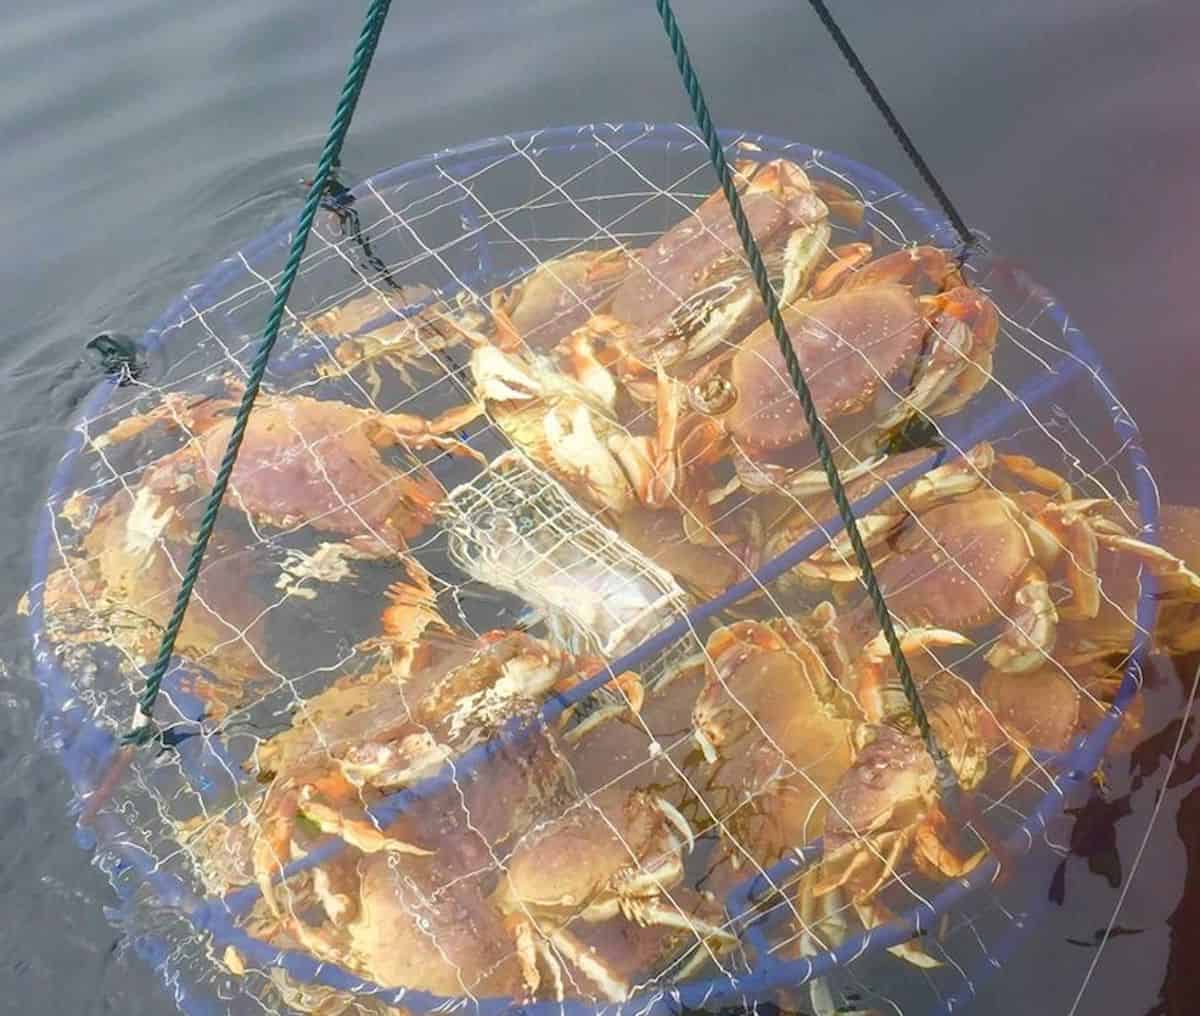 A trap brimming full of Dungeness crabs is pulled to the surface of the water.